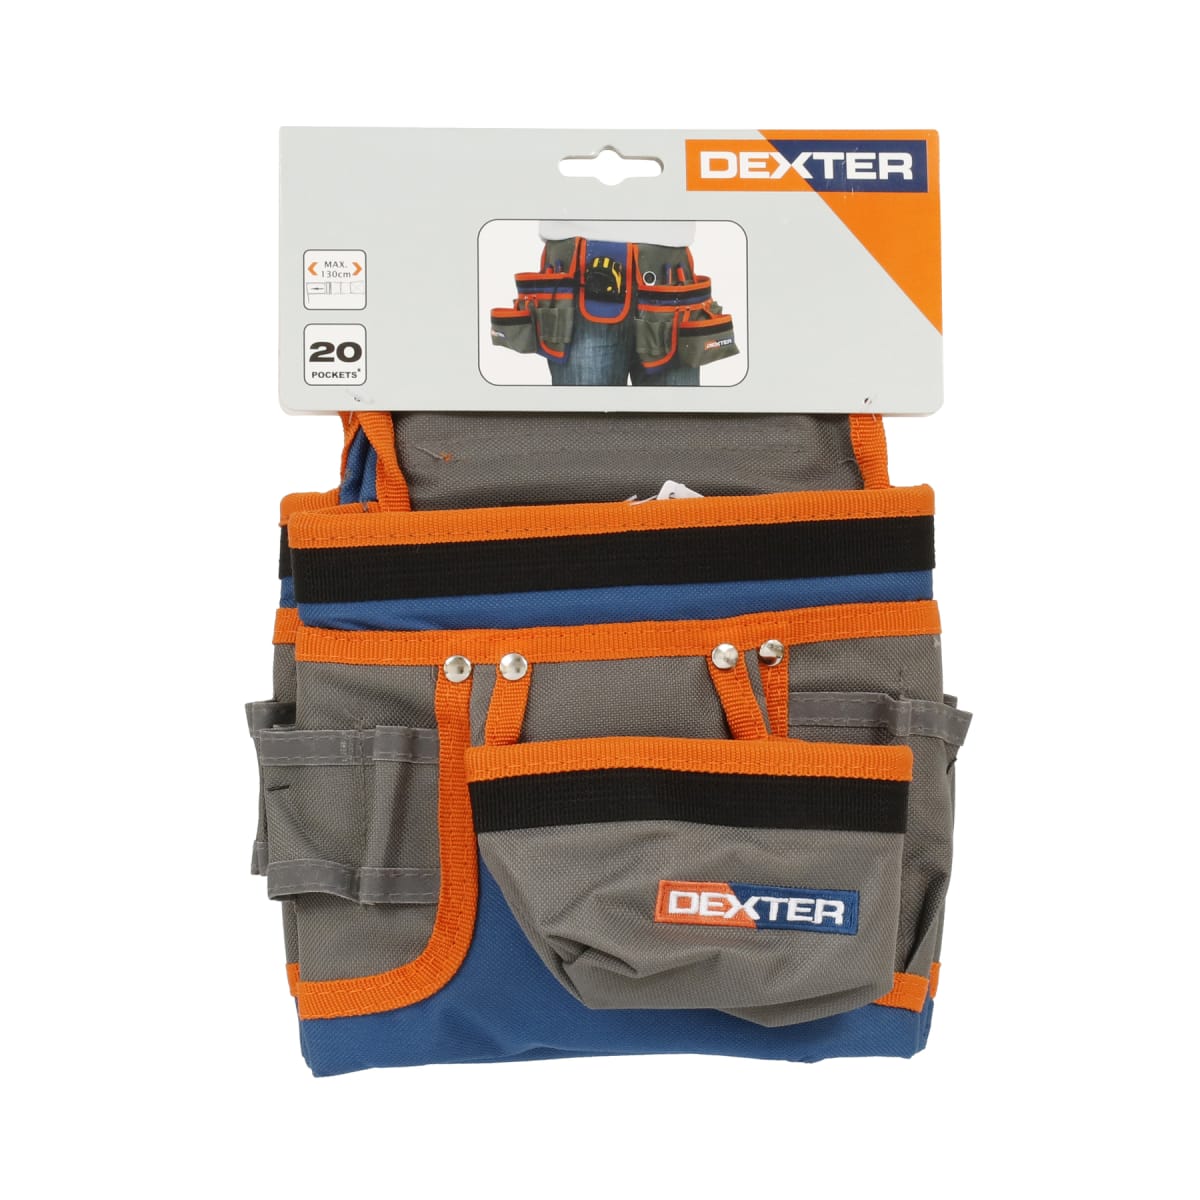 DEXTER FABRIC TOOL BELT WITH 20 POCKETS